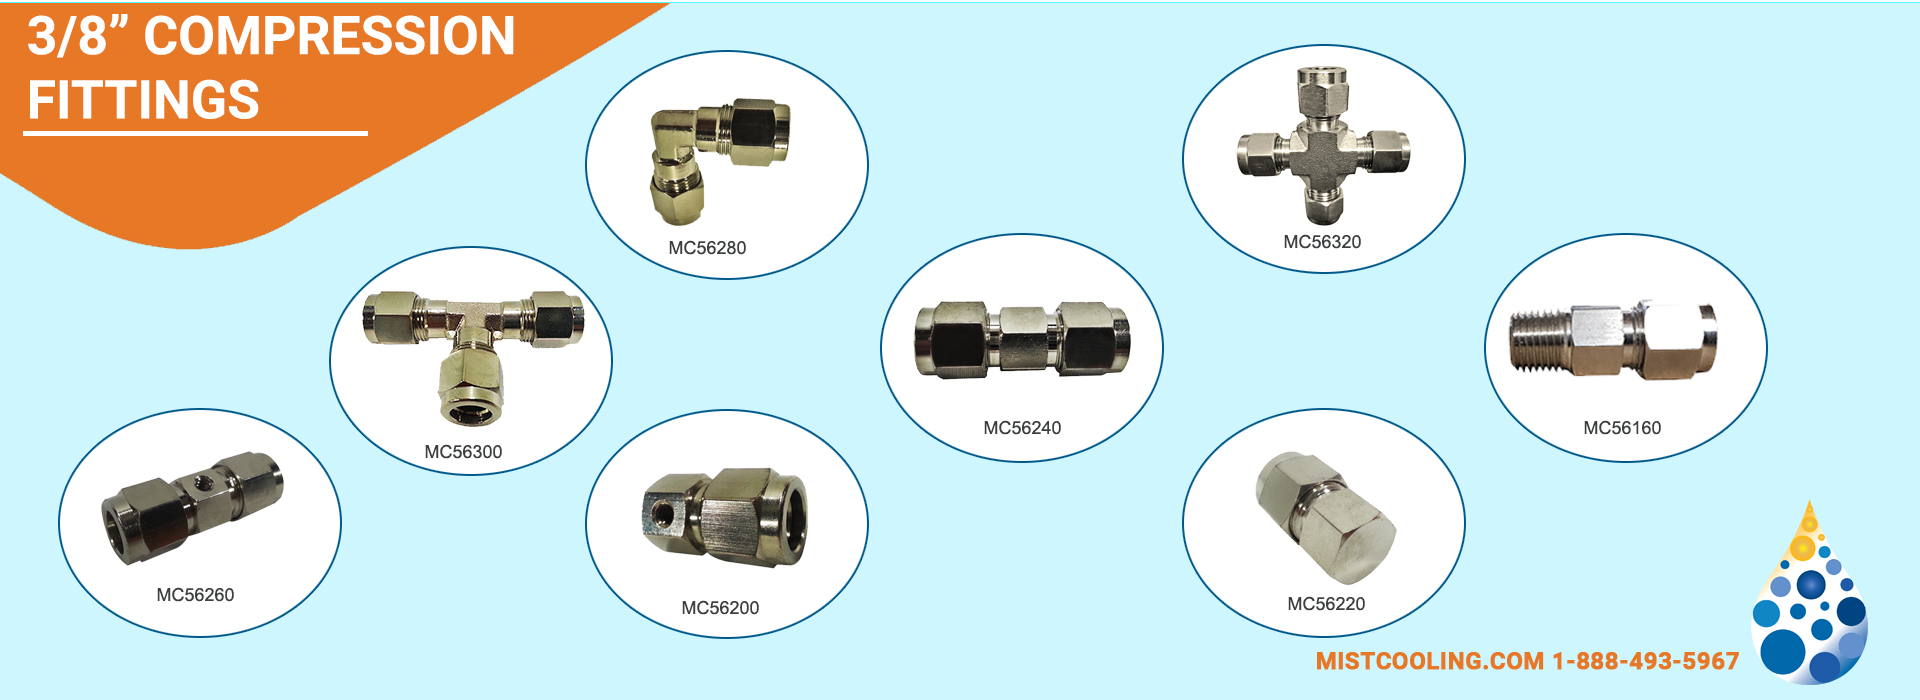 3-8 Compression Fittings